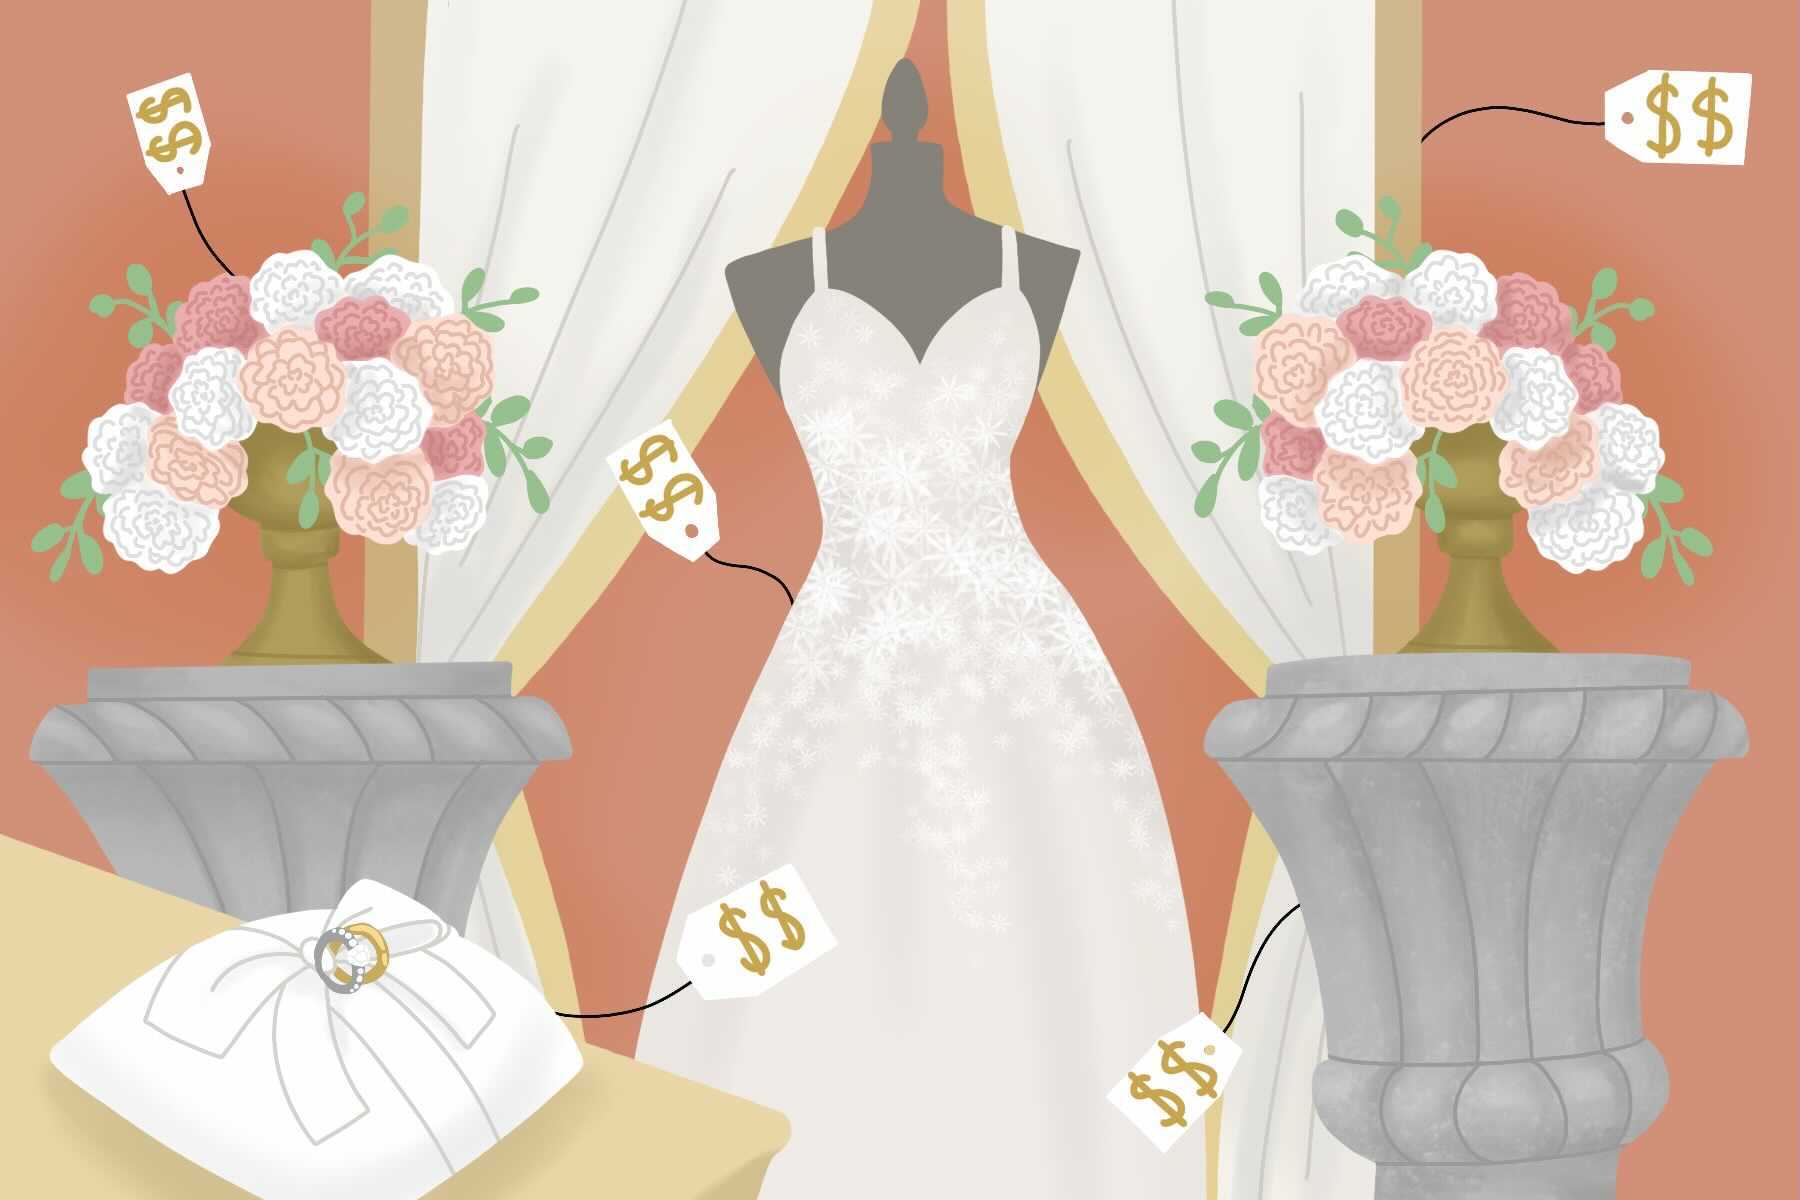 A wedding dress surrounded by flowers and price tags for an article about why weddings are expensive.